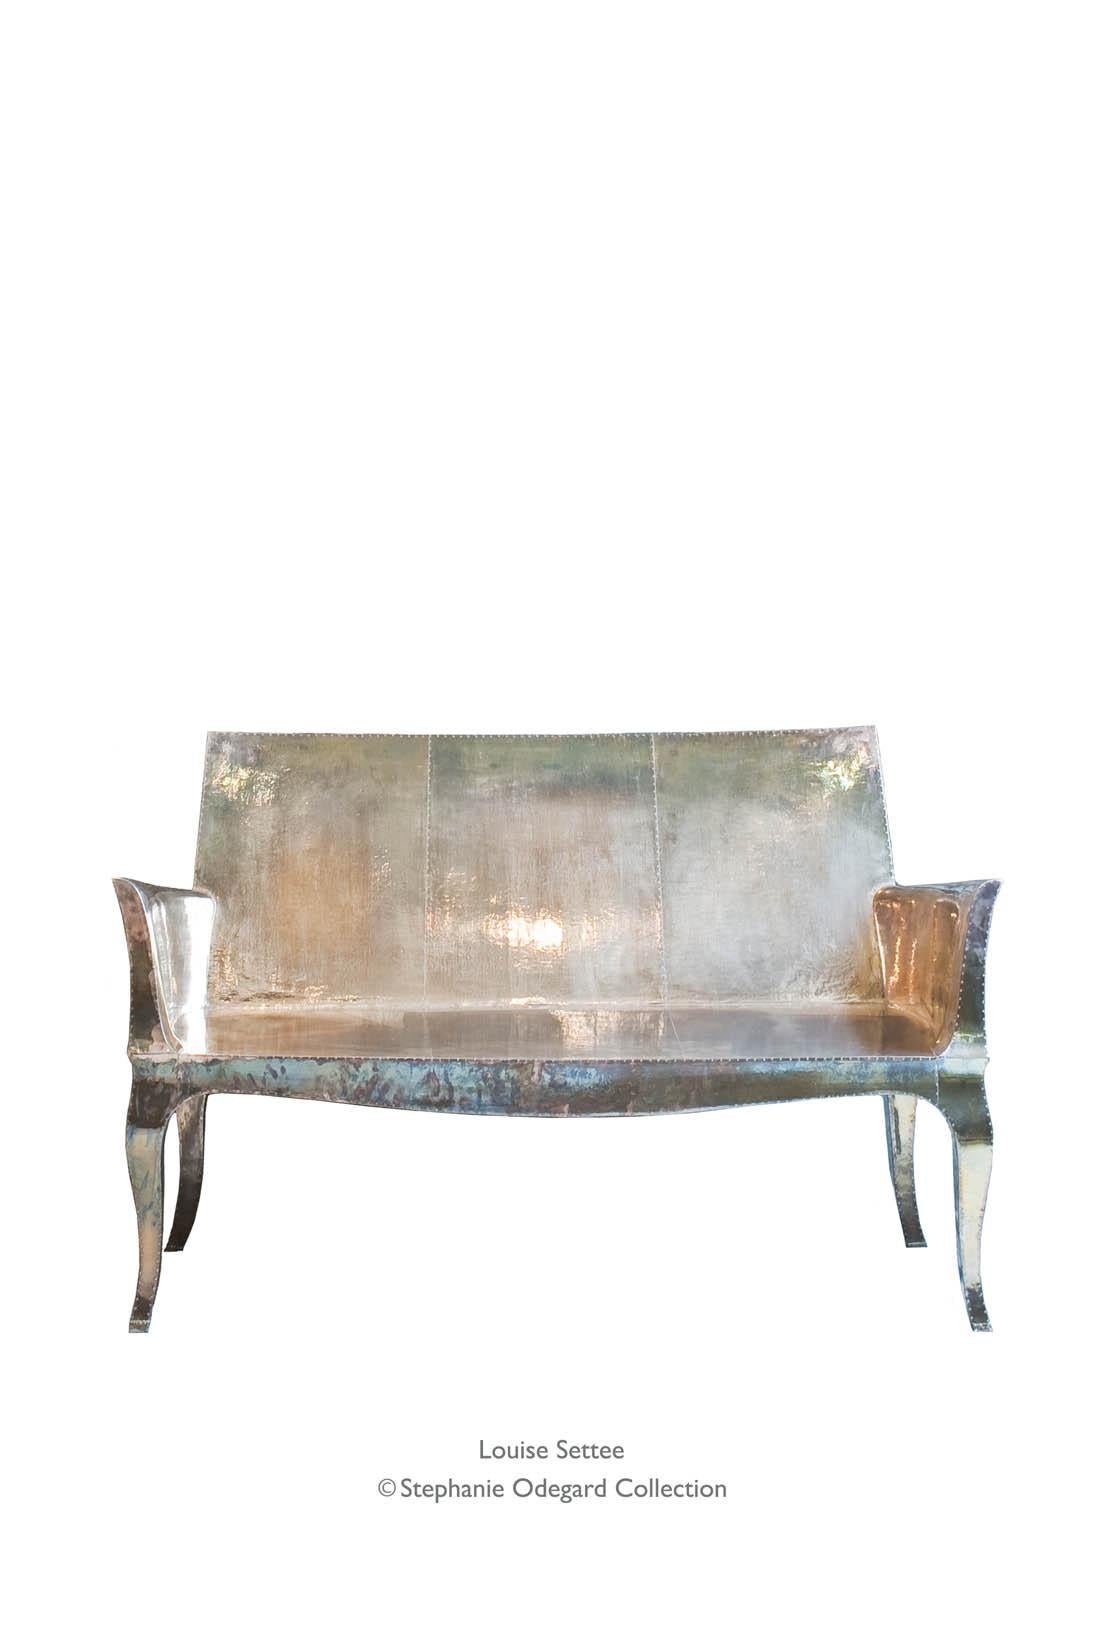 Louise Settee Art Deco Daybeds in Fine Hammered Copper by Paul Mathieu For Sale 6